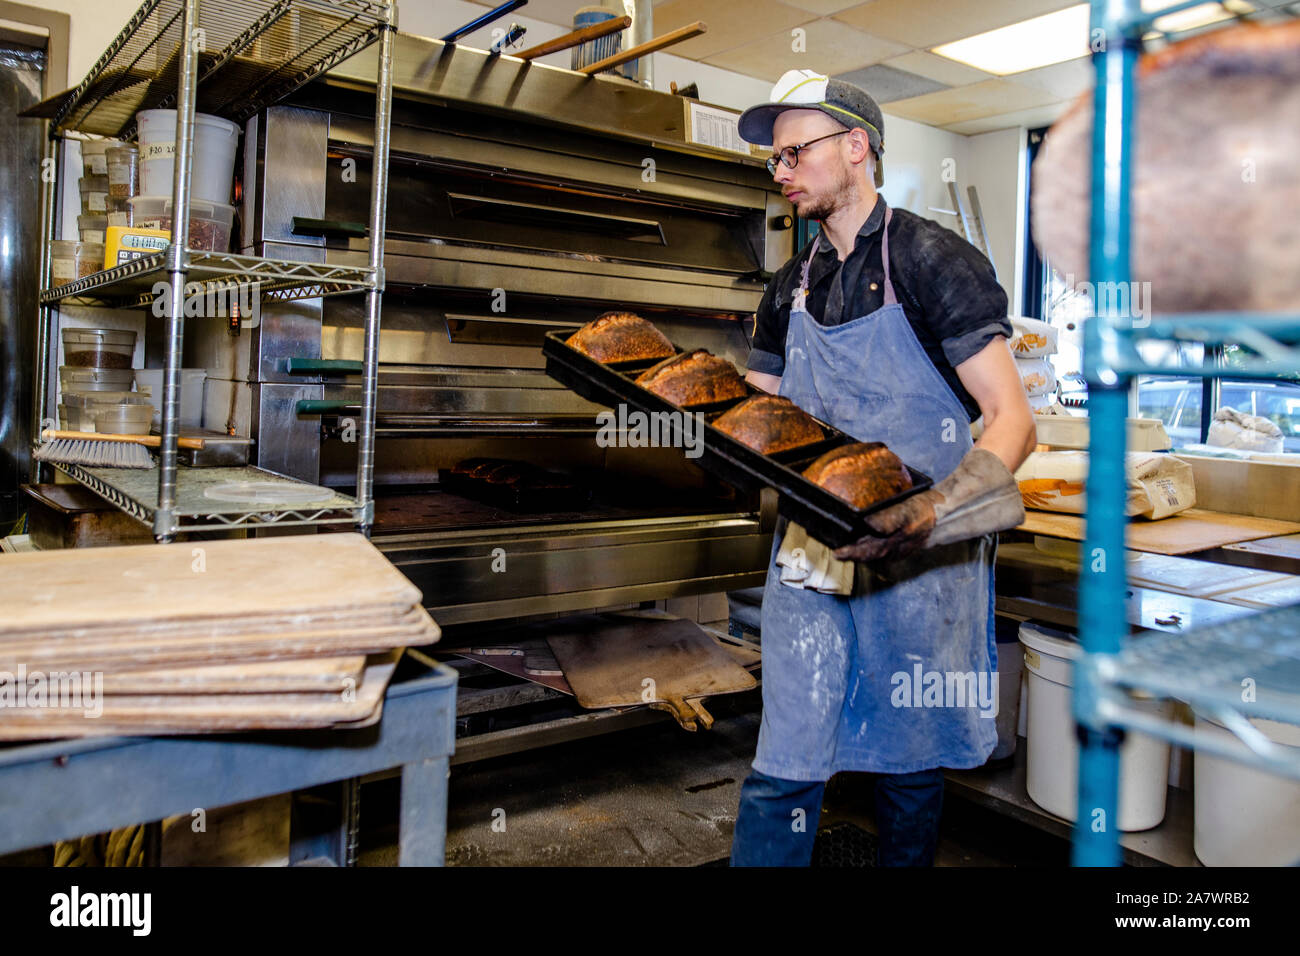 A professional baker carries tray of freshly baked bread from an oven Stock Photo